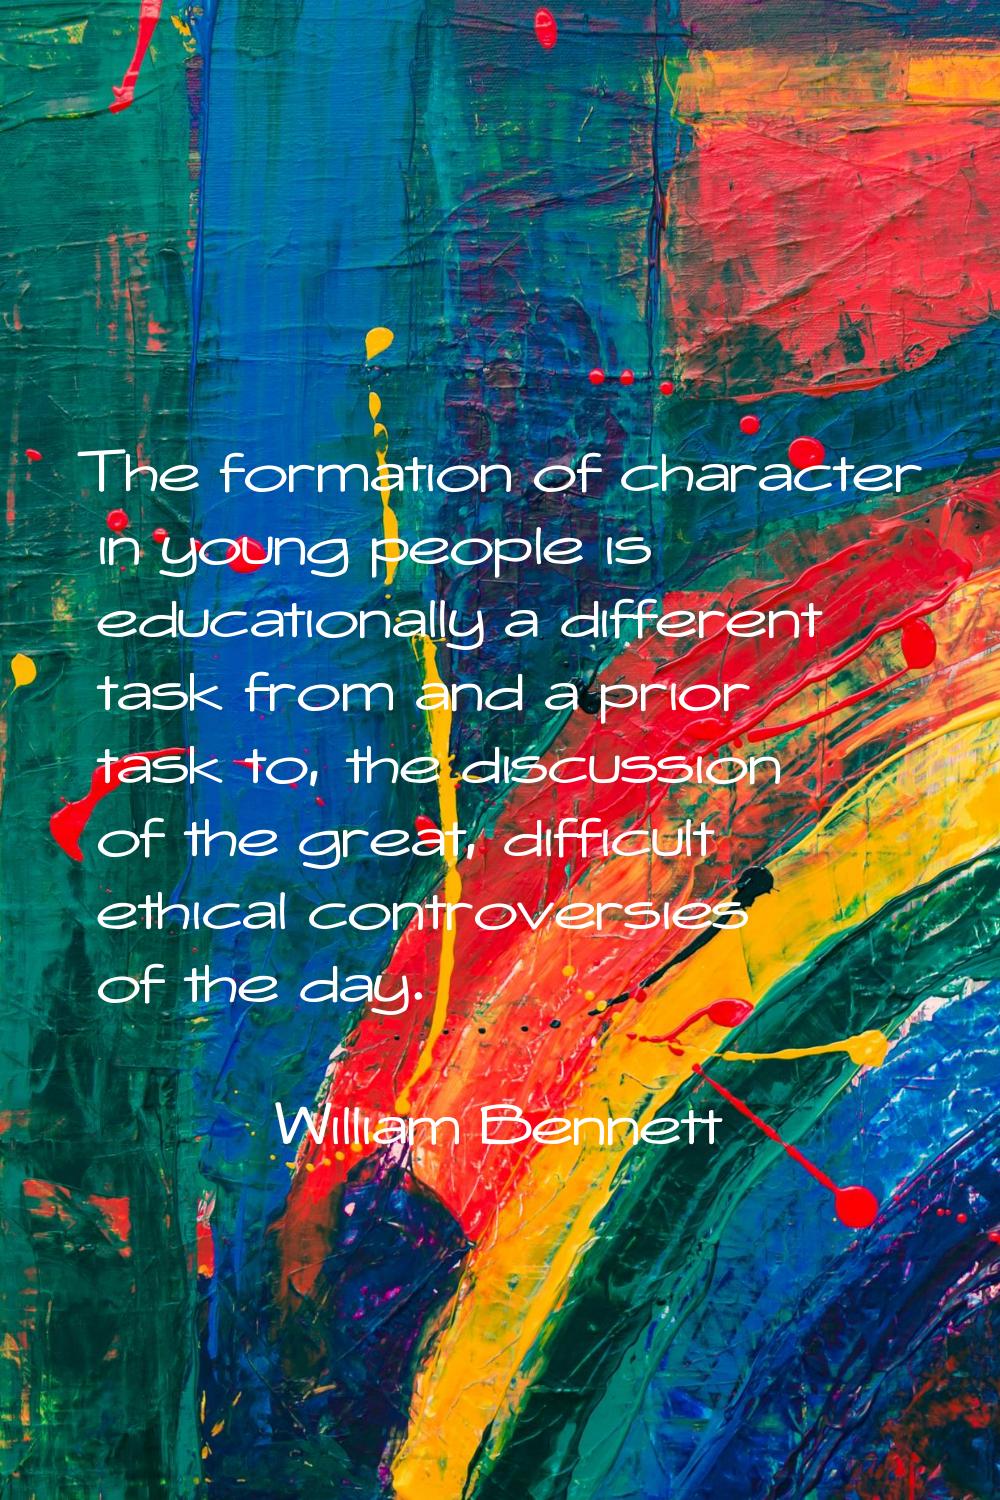 The formation of character in young people is educationally a different task from and a prior task 